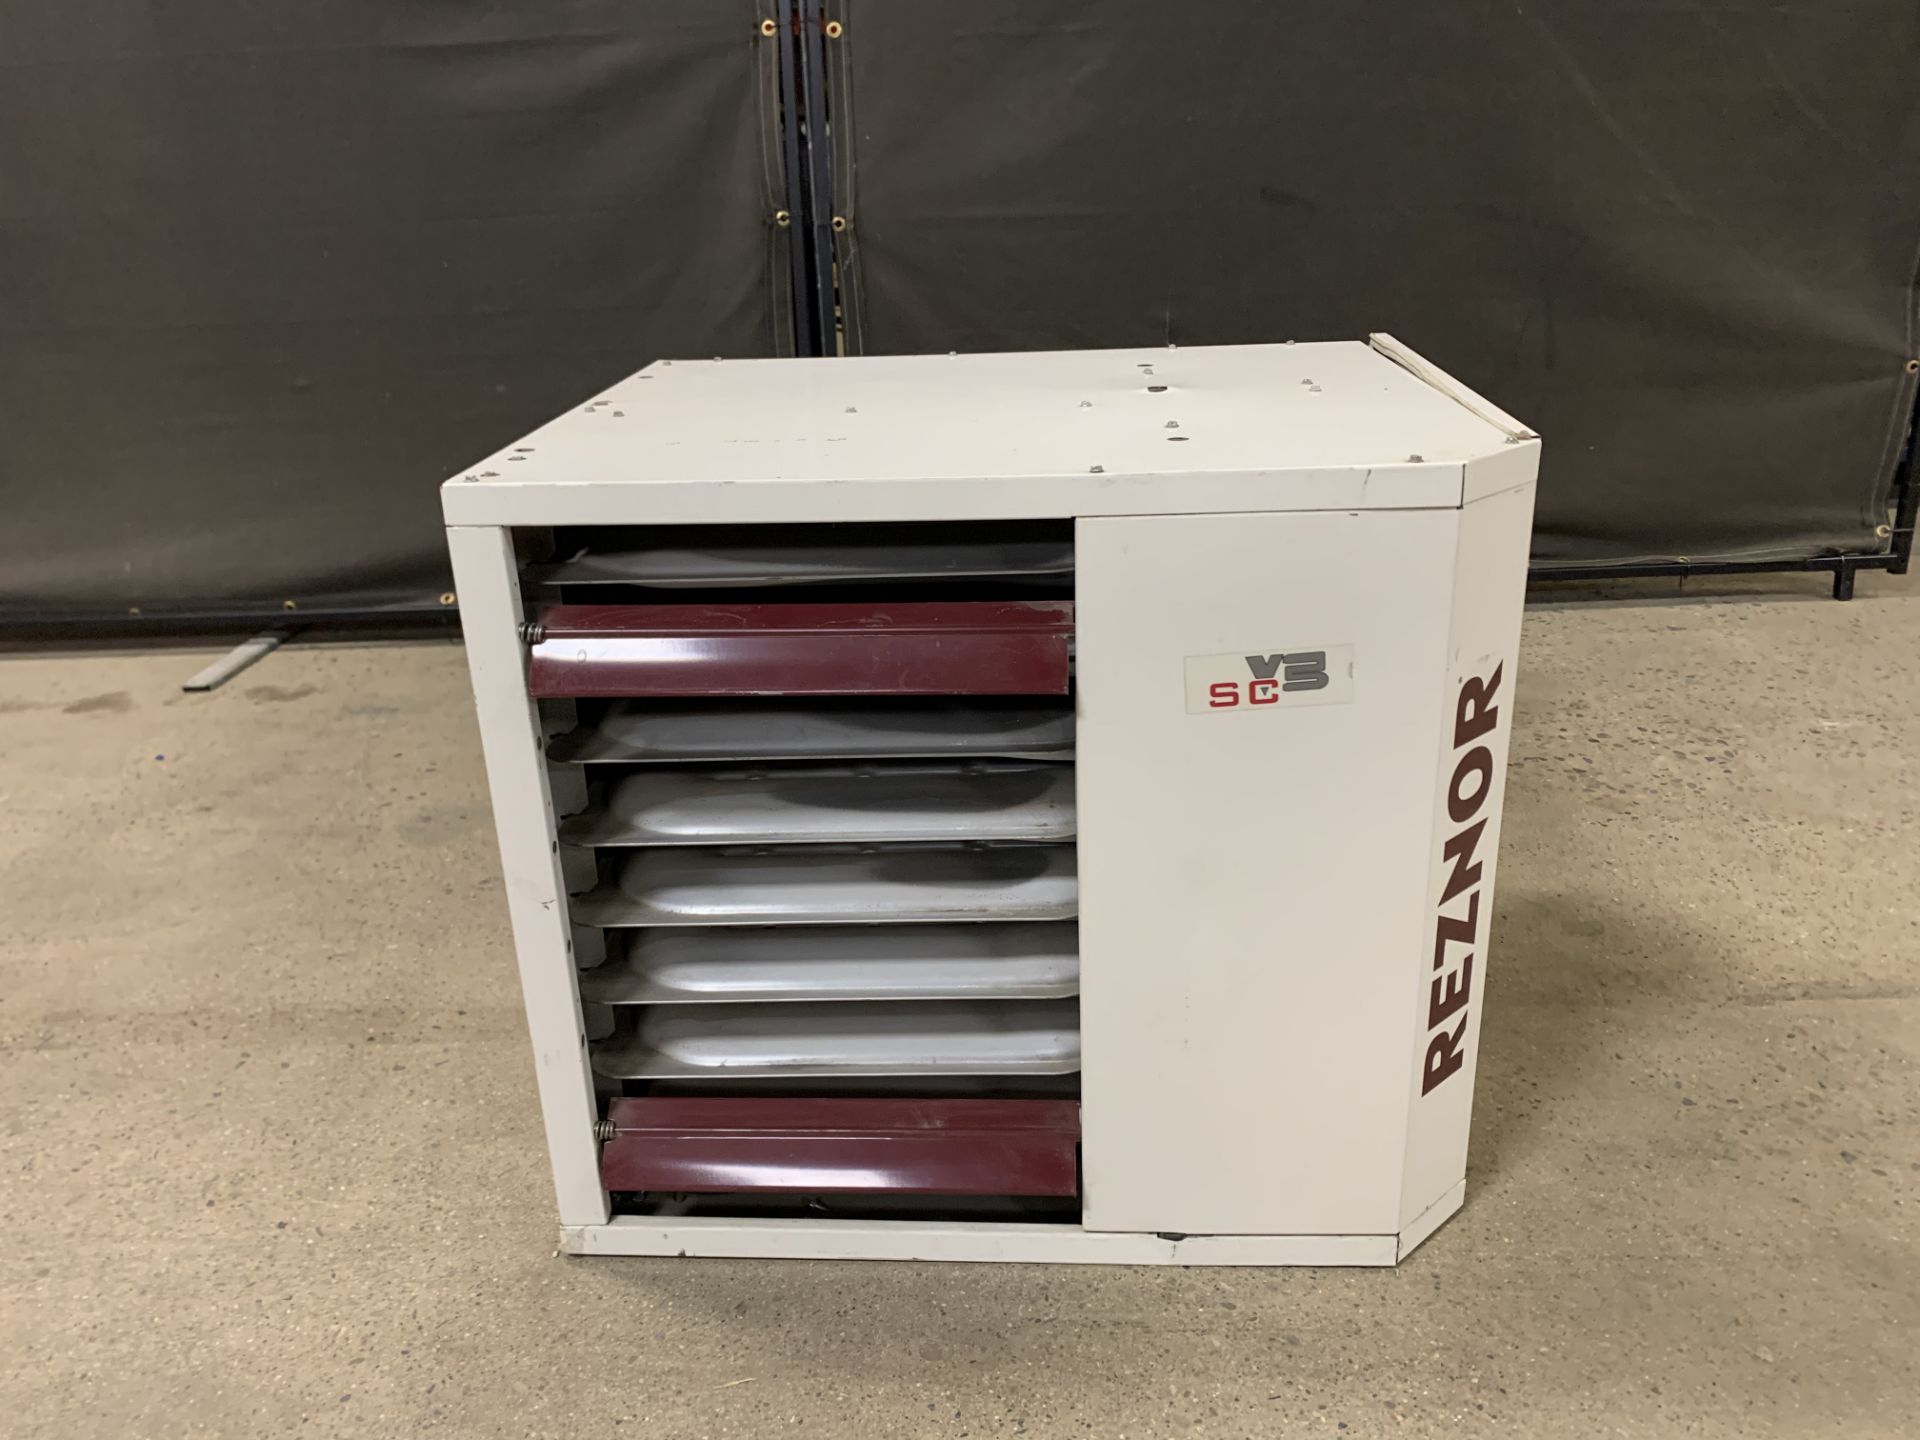 REZNOR V3 SERIES UDAS125 GAS-FIRED SEPARATED COMBUSTION HEATER UNIT, INPUT 120,000 BTUH, OUTPUT 99,